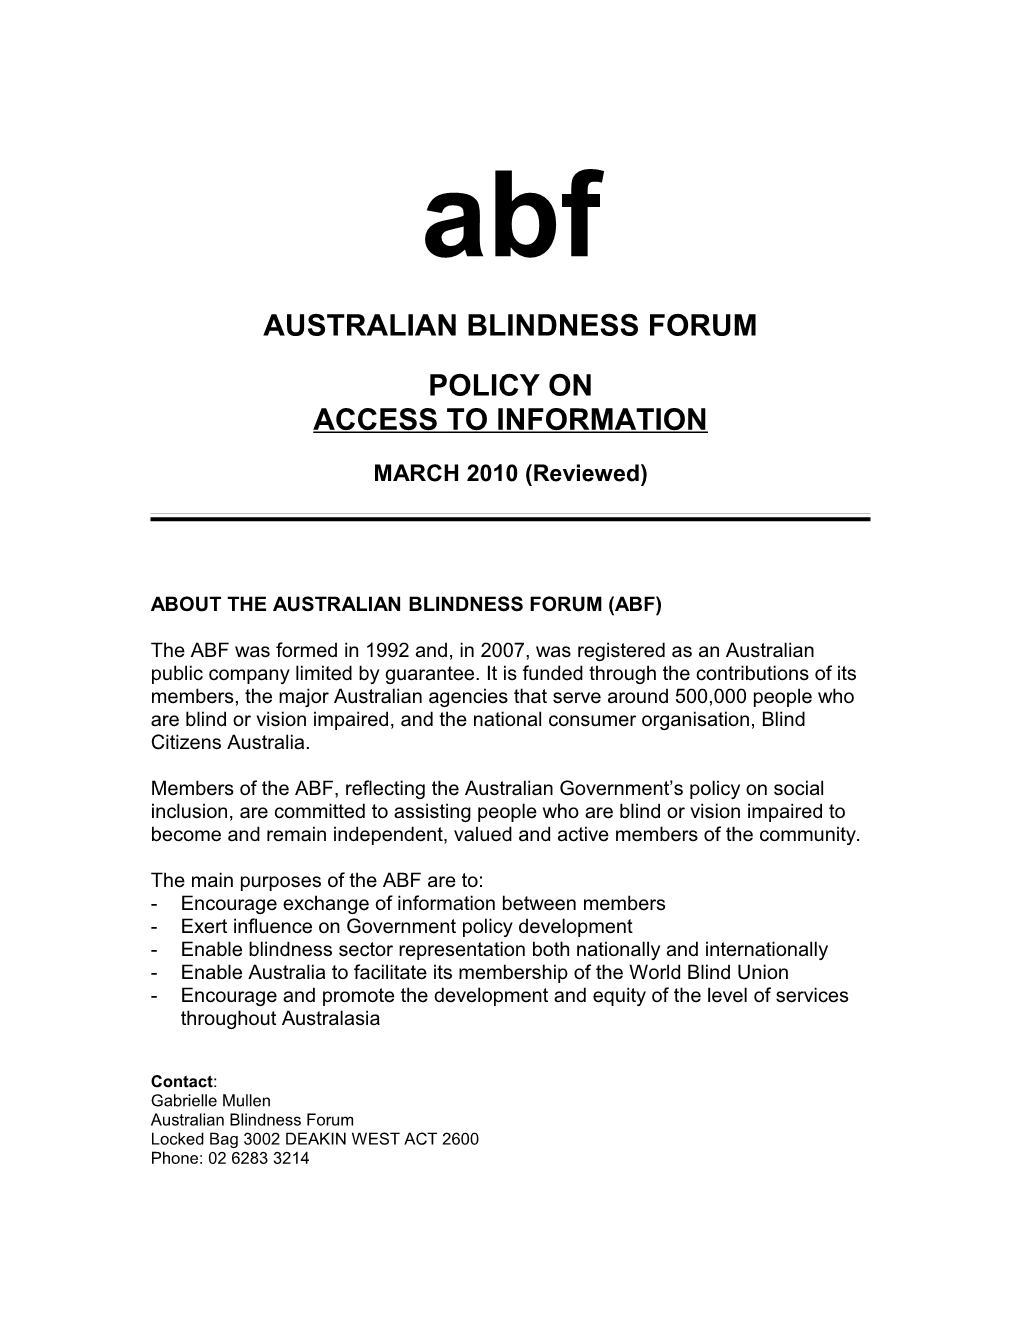 About the Australian Blindness Forum (Abf)